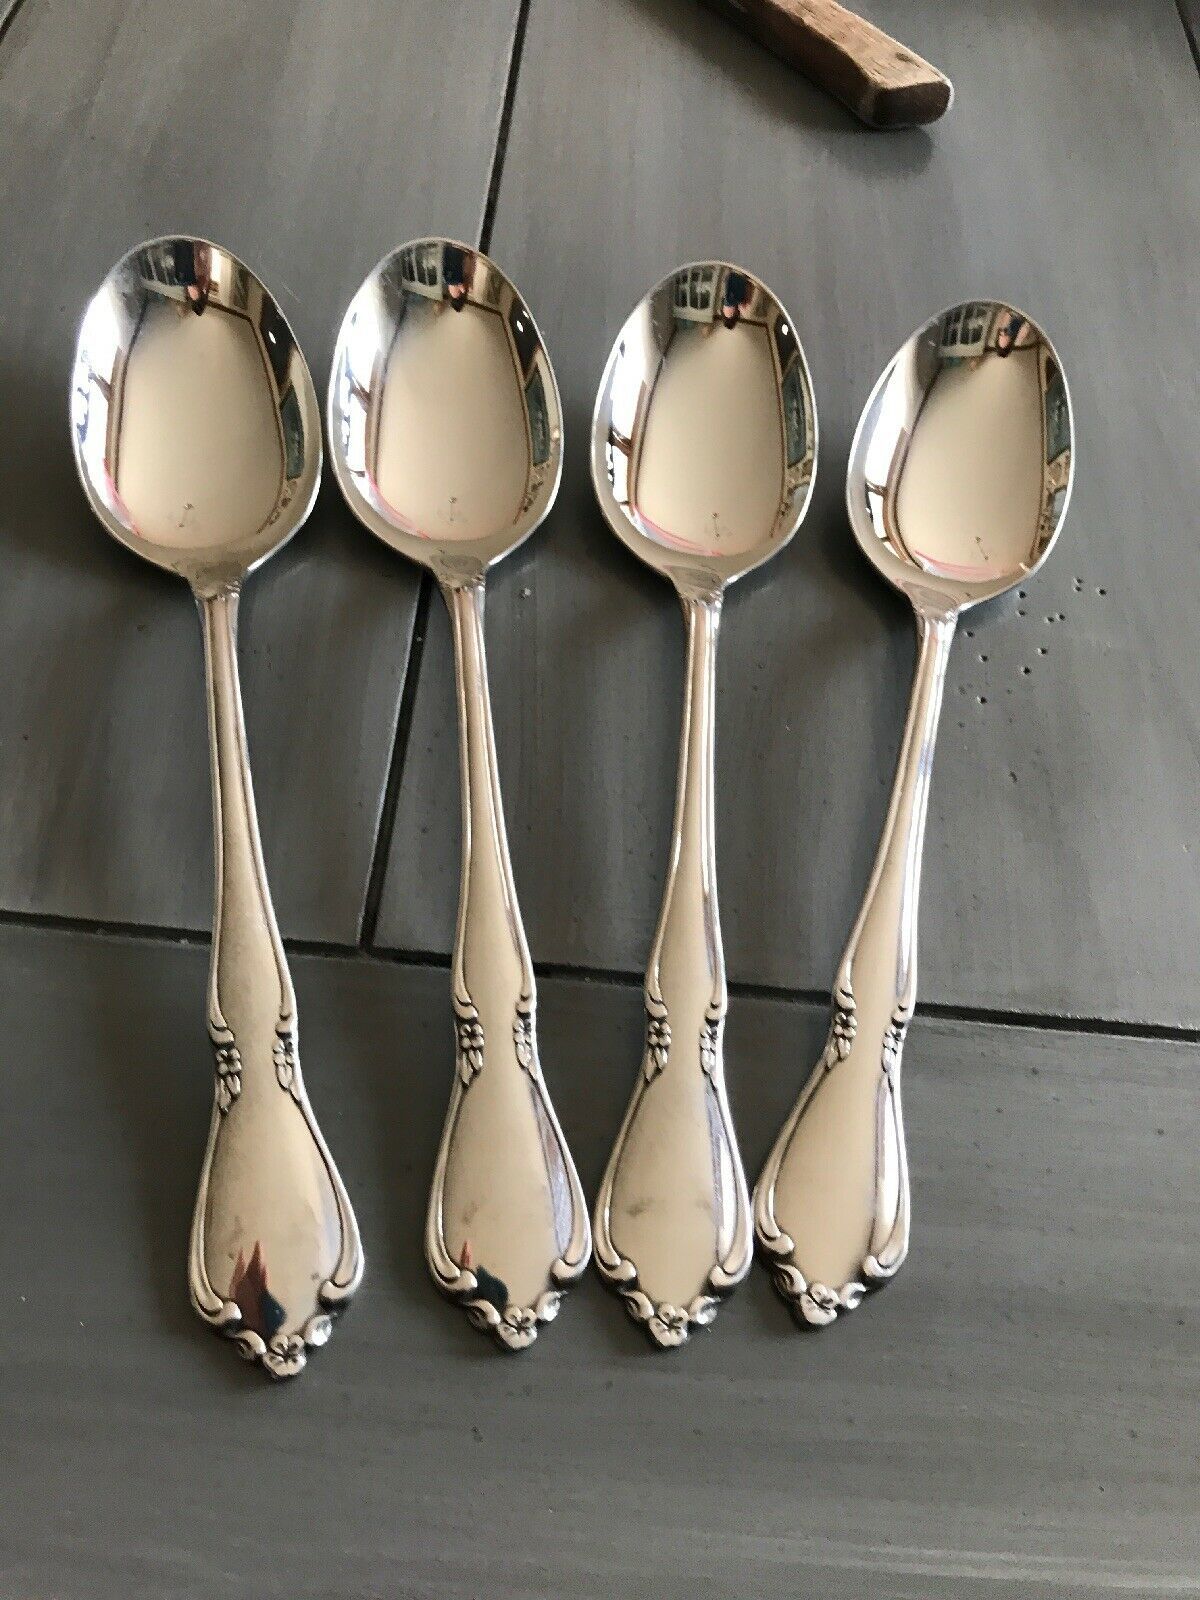 Pottery Barn LETTUCE Pattern Tablespoon s 18/8 Glossy Stainless Flatware Japan 